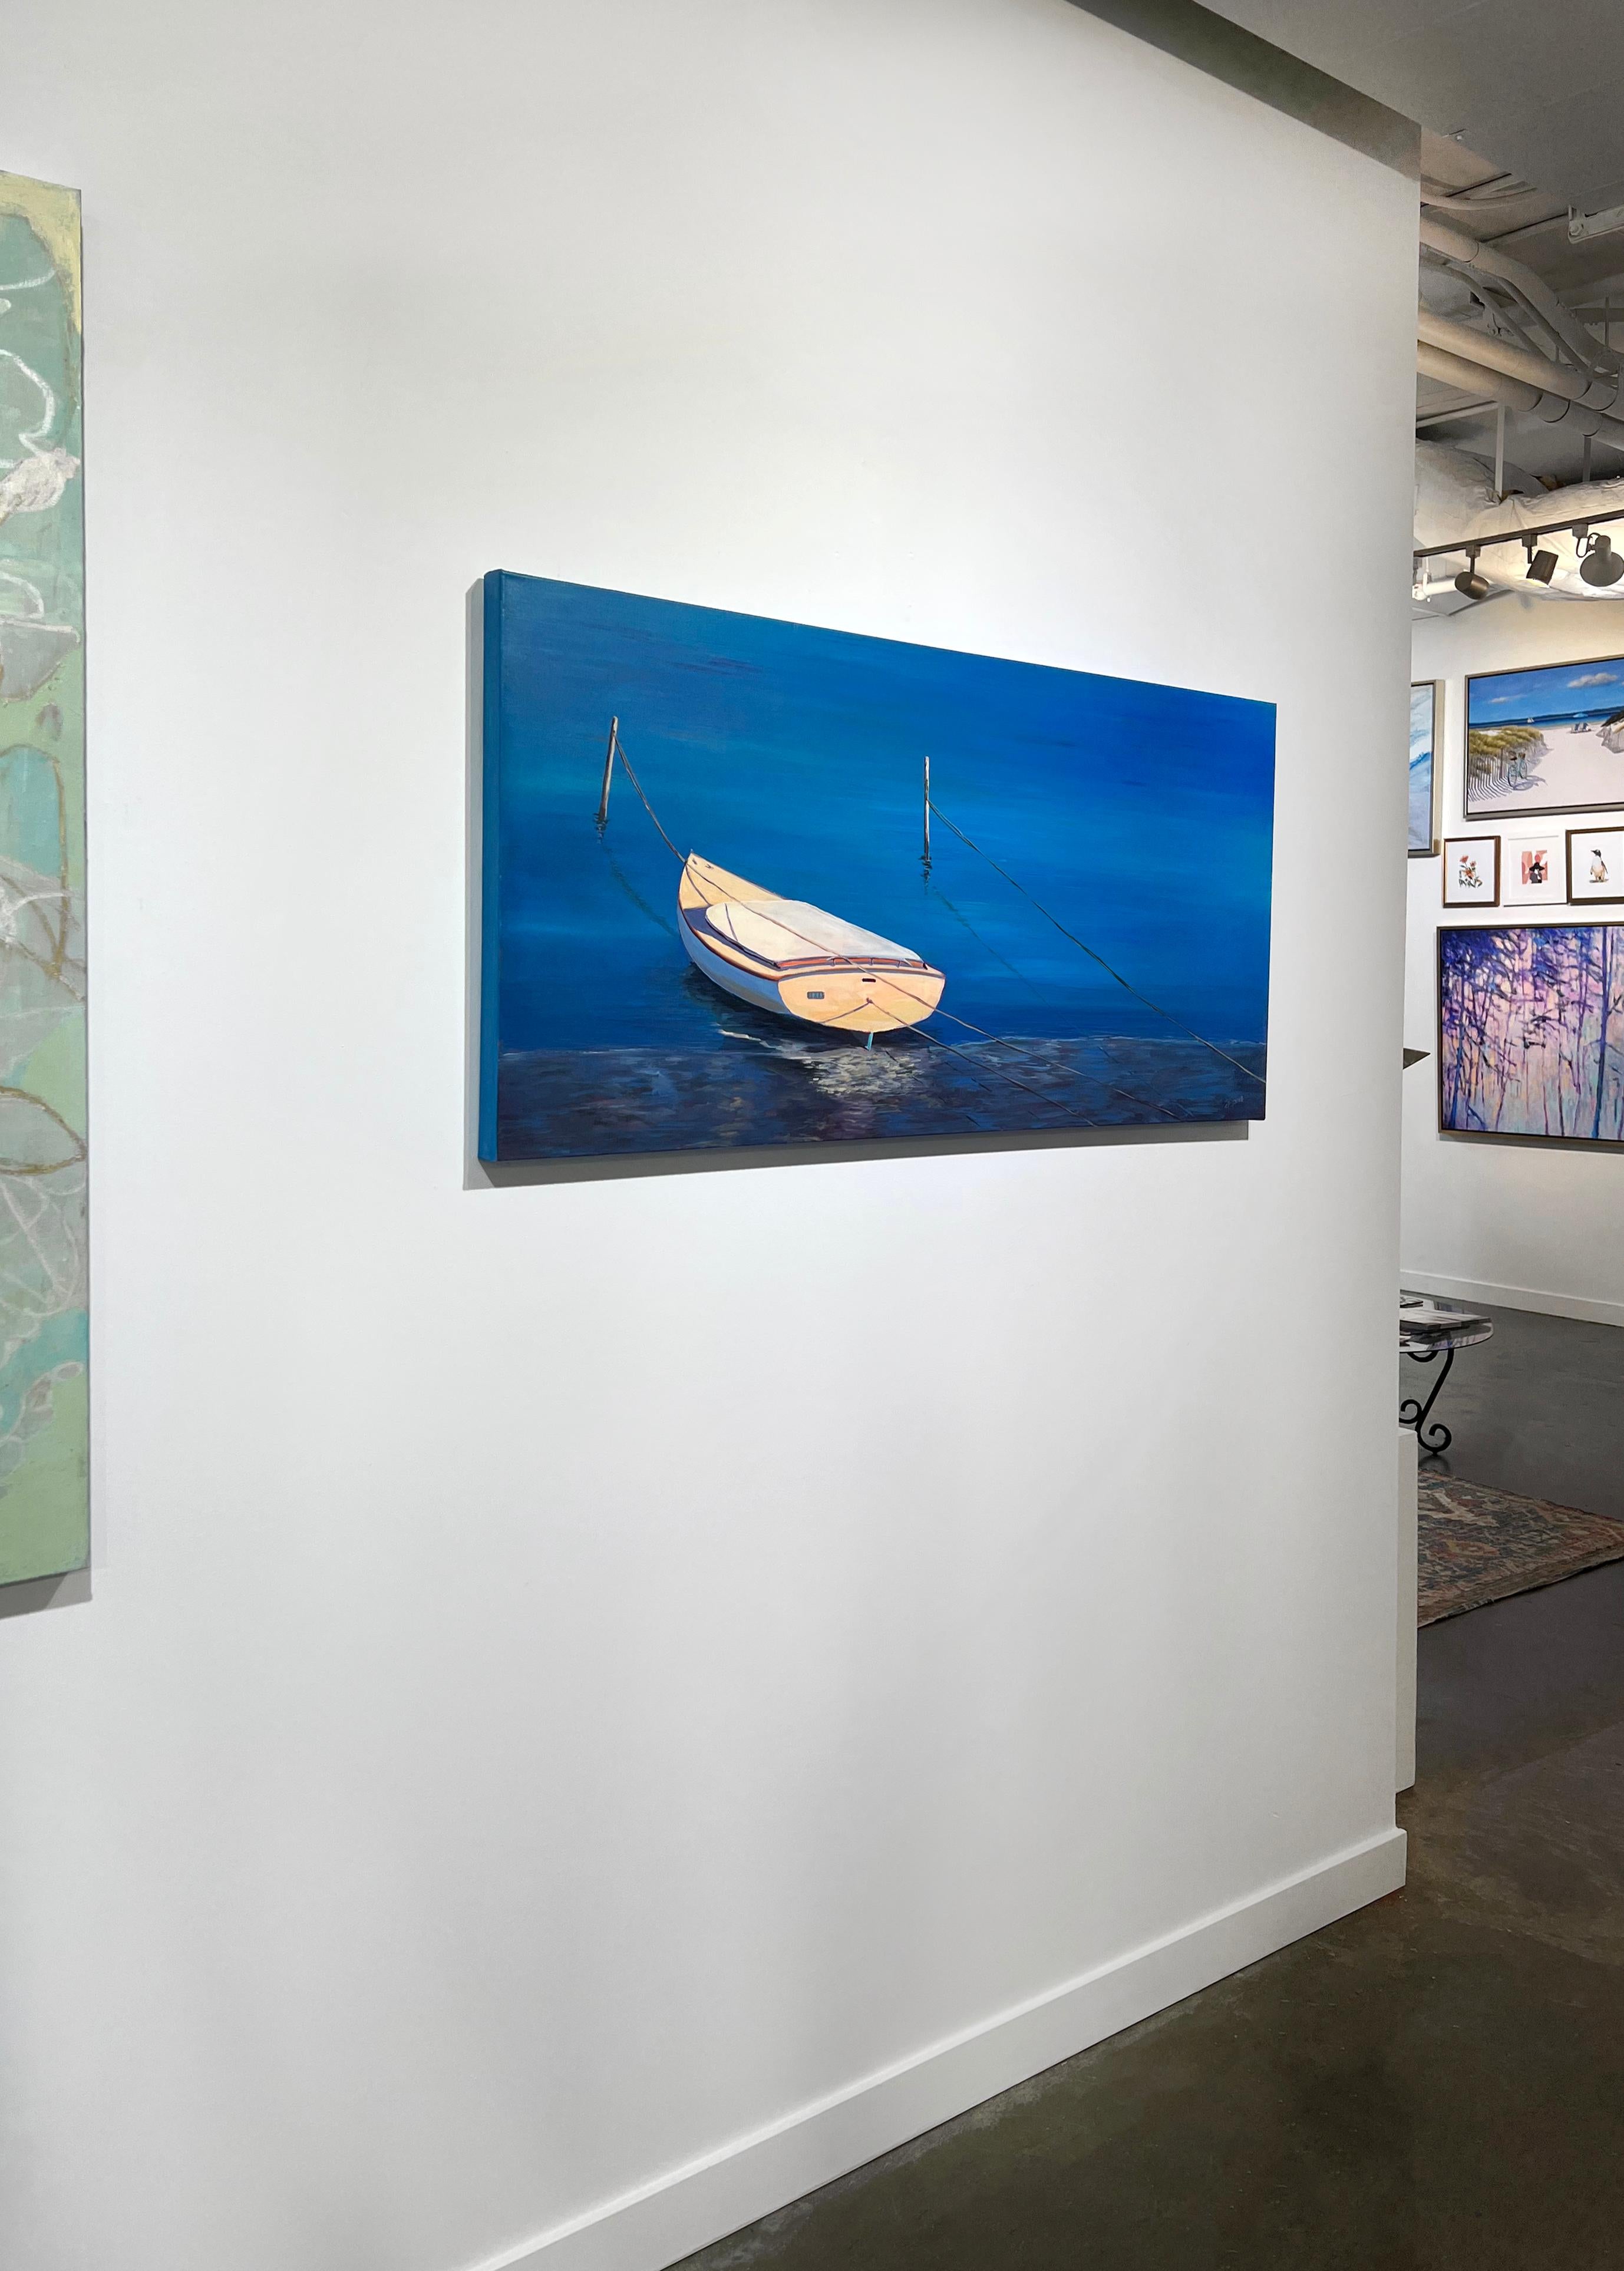 This original contemporary coastal painting by Carol Young features a cool blue palette. It captures a warm, creme-colored dinghy boat docked along a shallow shore, surrounded by vibrant, reflective blue water. It is made with acrylic on gallery